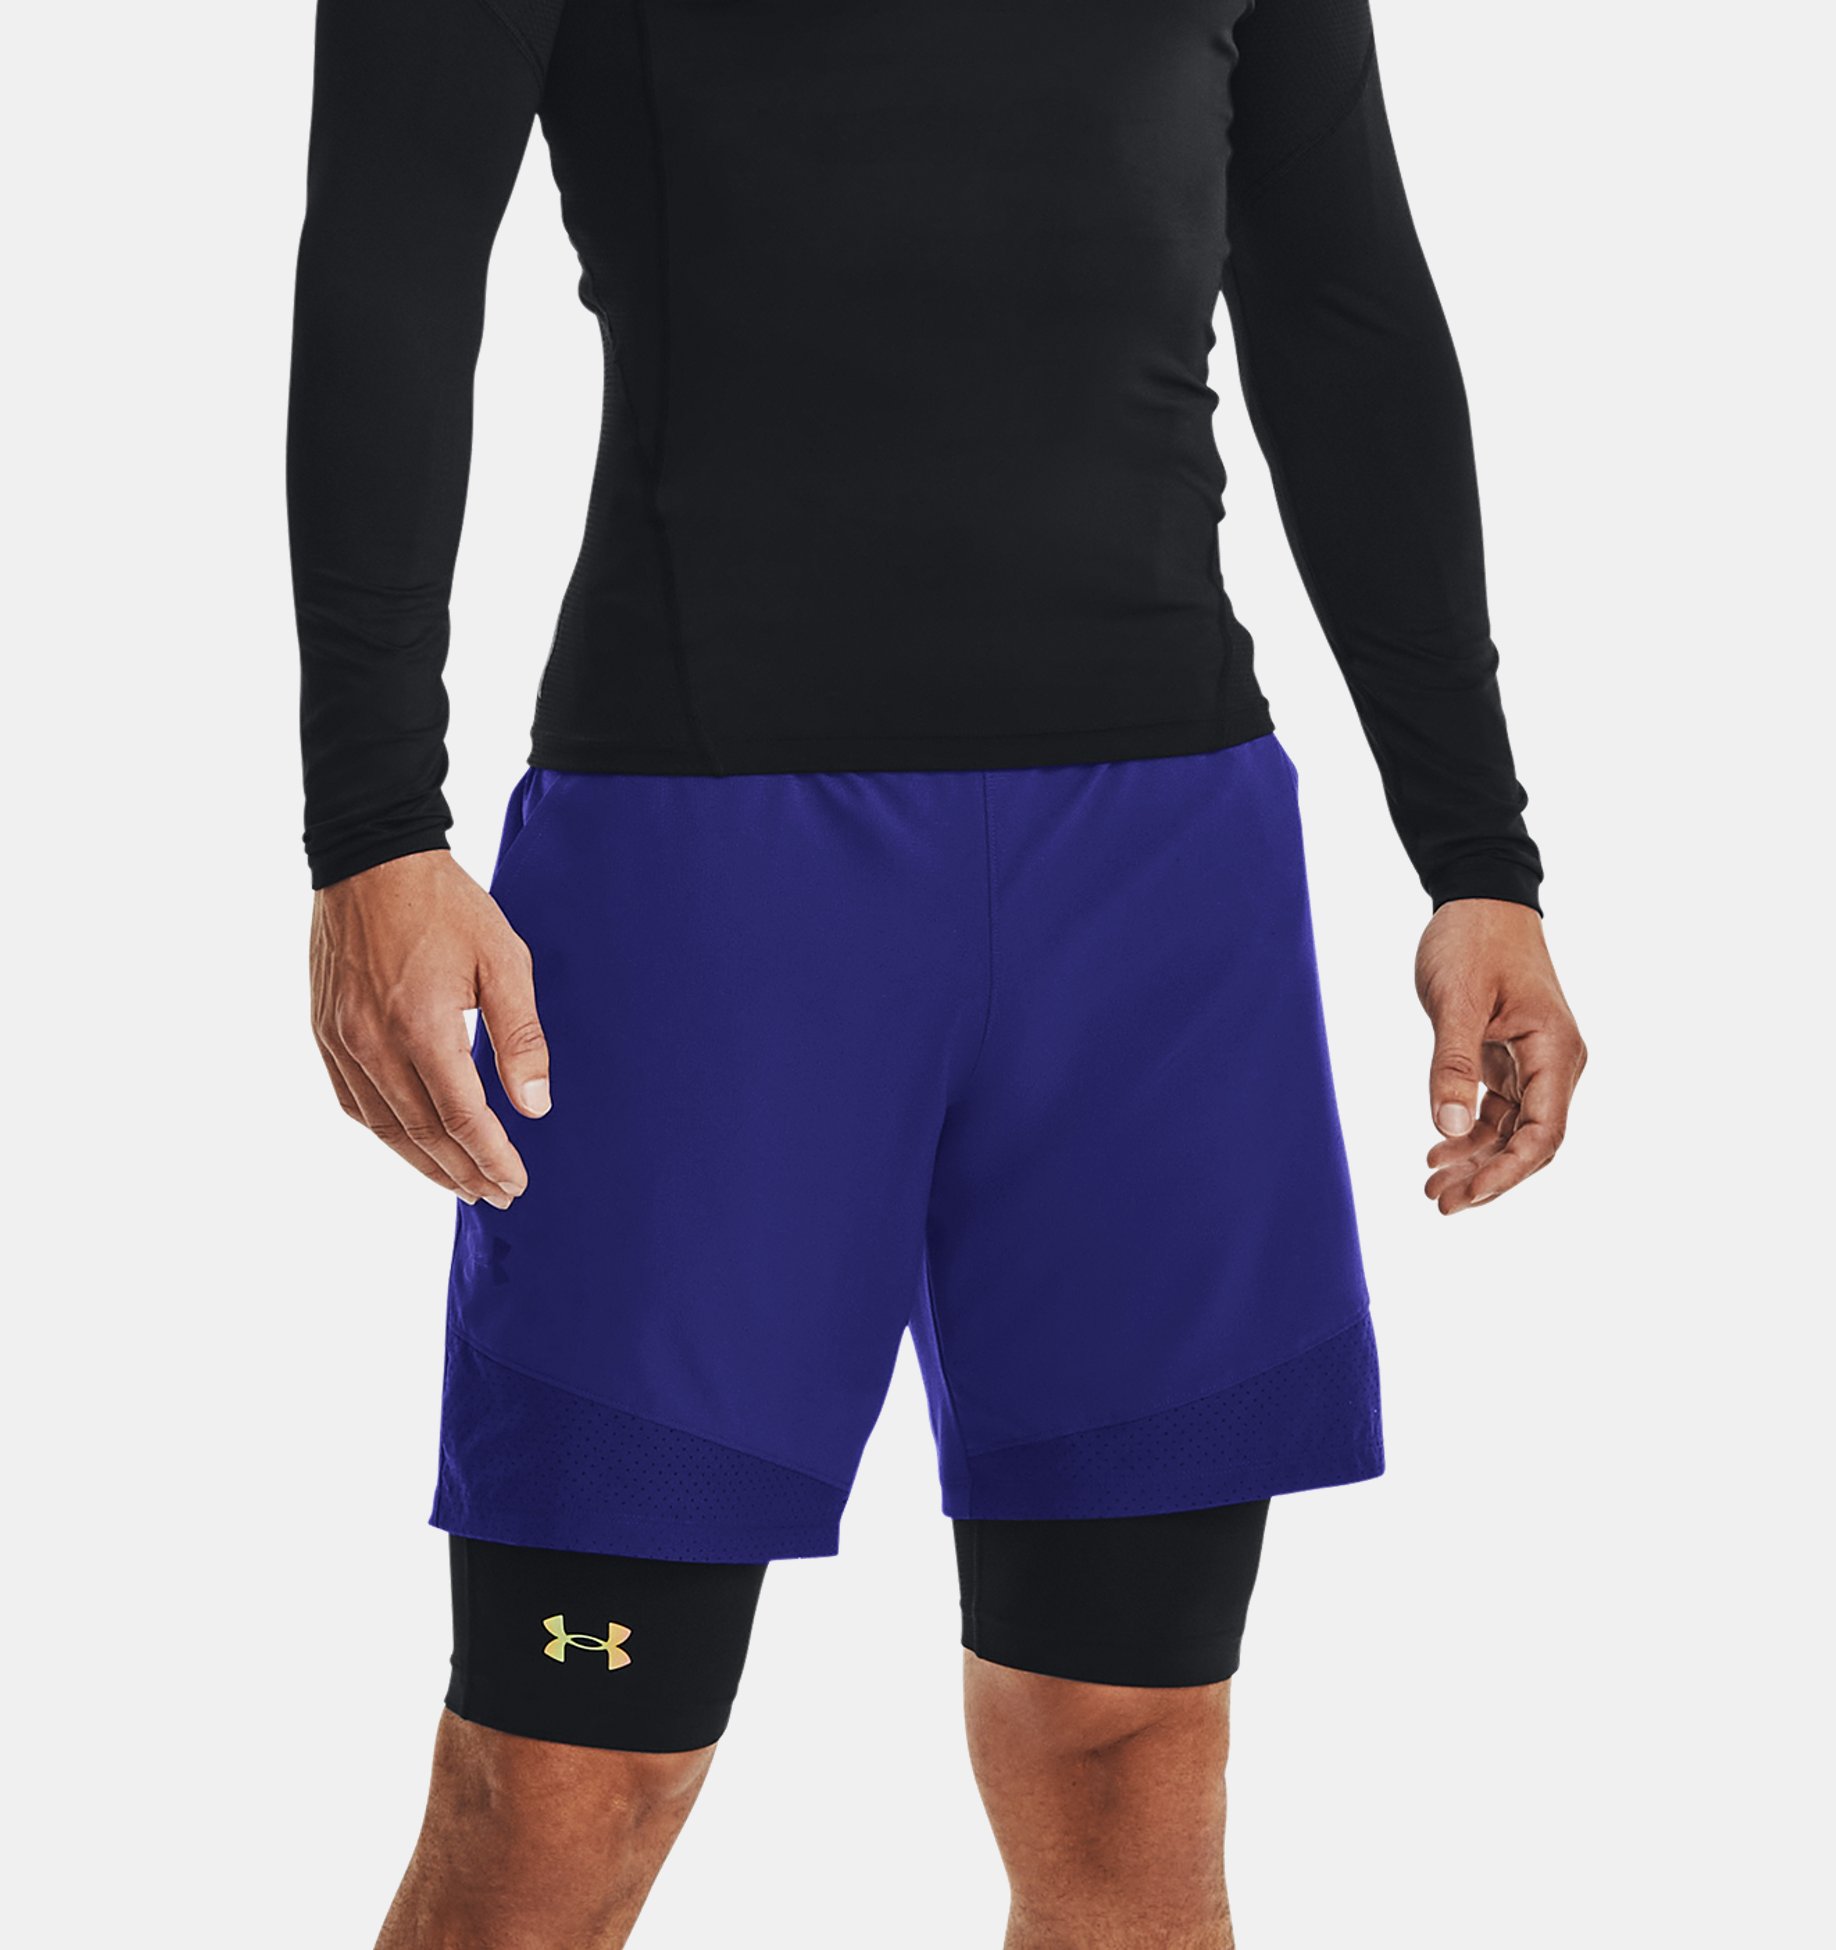 Under Armour RUSH Compression Gear Helps You Recover Faster - Men's Journal